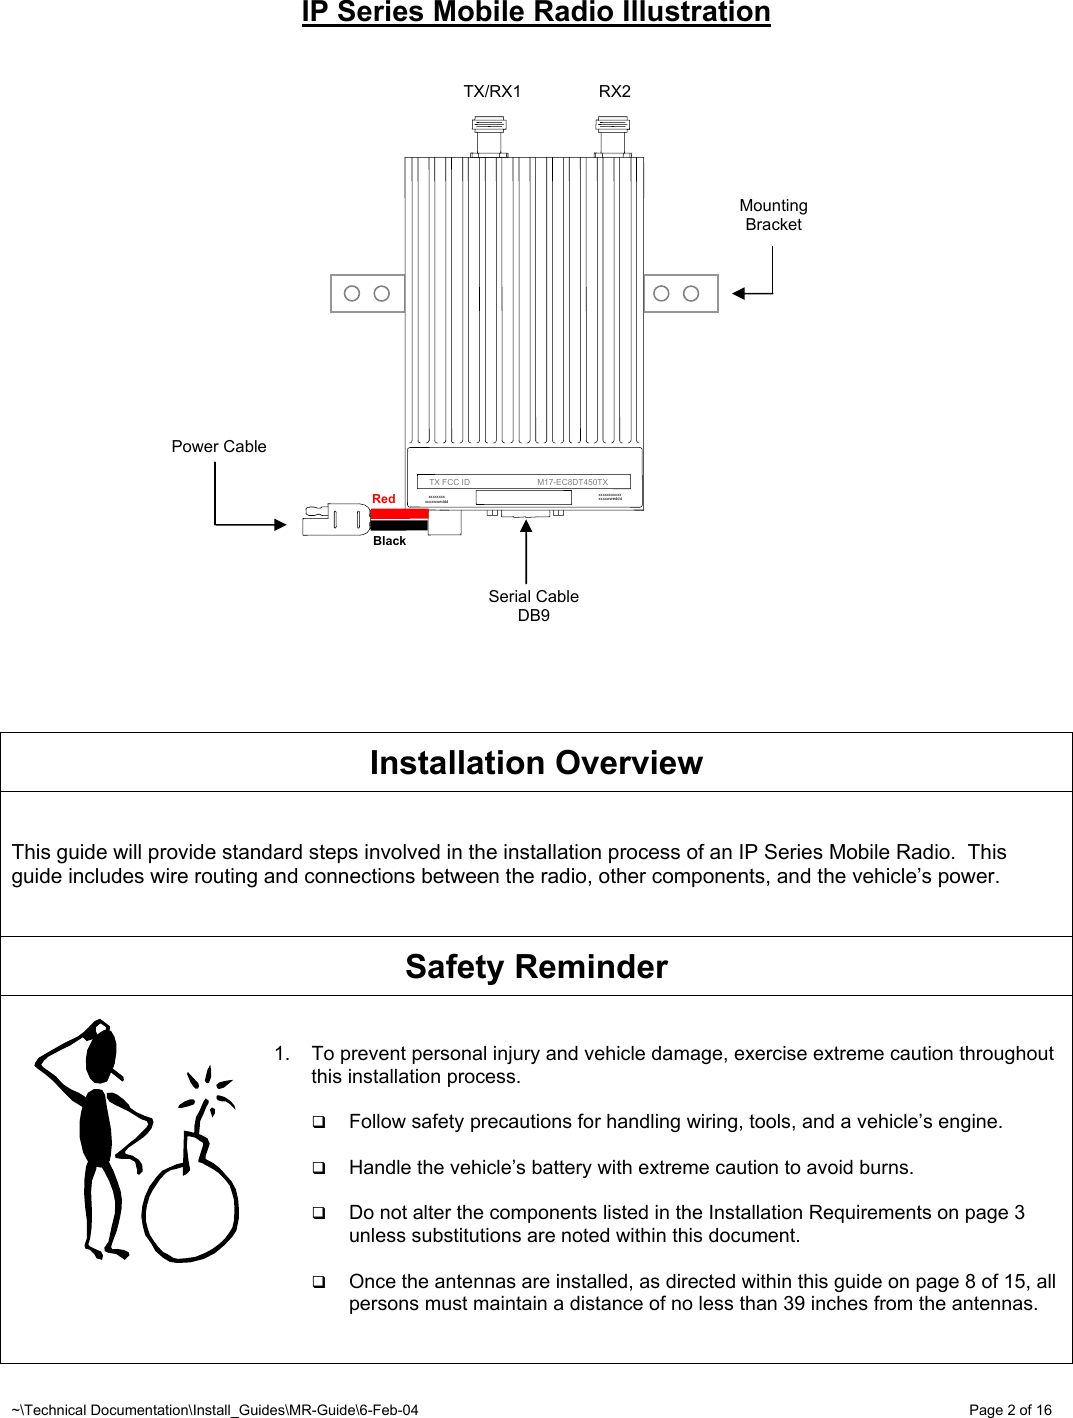 ~\Technical Documentation\Install_Guides\MR-Guide\6-Feb-04   Page 2 of 16 IP Series Mobile Radio Illustration                      Installation Overview   This guide will provide standard steps involved in the installation process of an IP Series Mobile Radio.  This guide includes wire routing and connections between the radio, other components, and the vehicle’s power.    Safety Reminder   1.  To prevent personal injury and vehicle damage, exercise extreme caution throughout this installation process.   Follow safety precautions for handling wiring, tools, and a vehicle’s engine.   Handle the vehicle’s battery with extreme caution to avoid burns.   Do not alter the components listed in the Installation Requirements on page 3 unless substitutions are noted within this document.   Once the antennas are installed, as directed within this guide on page 8 of 15, all persons must maintain a distance of no less than 39 inches from the antennas.       Black Red   TX/RX1  RX2 Serial Cable DB9 Power Cable  Mounting Bracket      TX FCC ID                             M17-EC8DT450TX xxxxxxxx xxx xxxxwweddd xxxxxxxx xxxxwweddd 